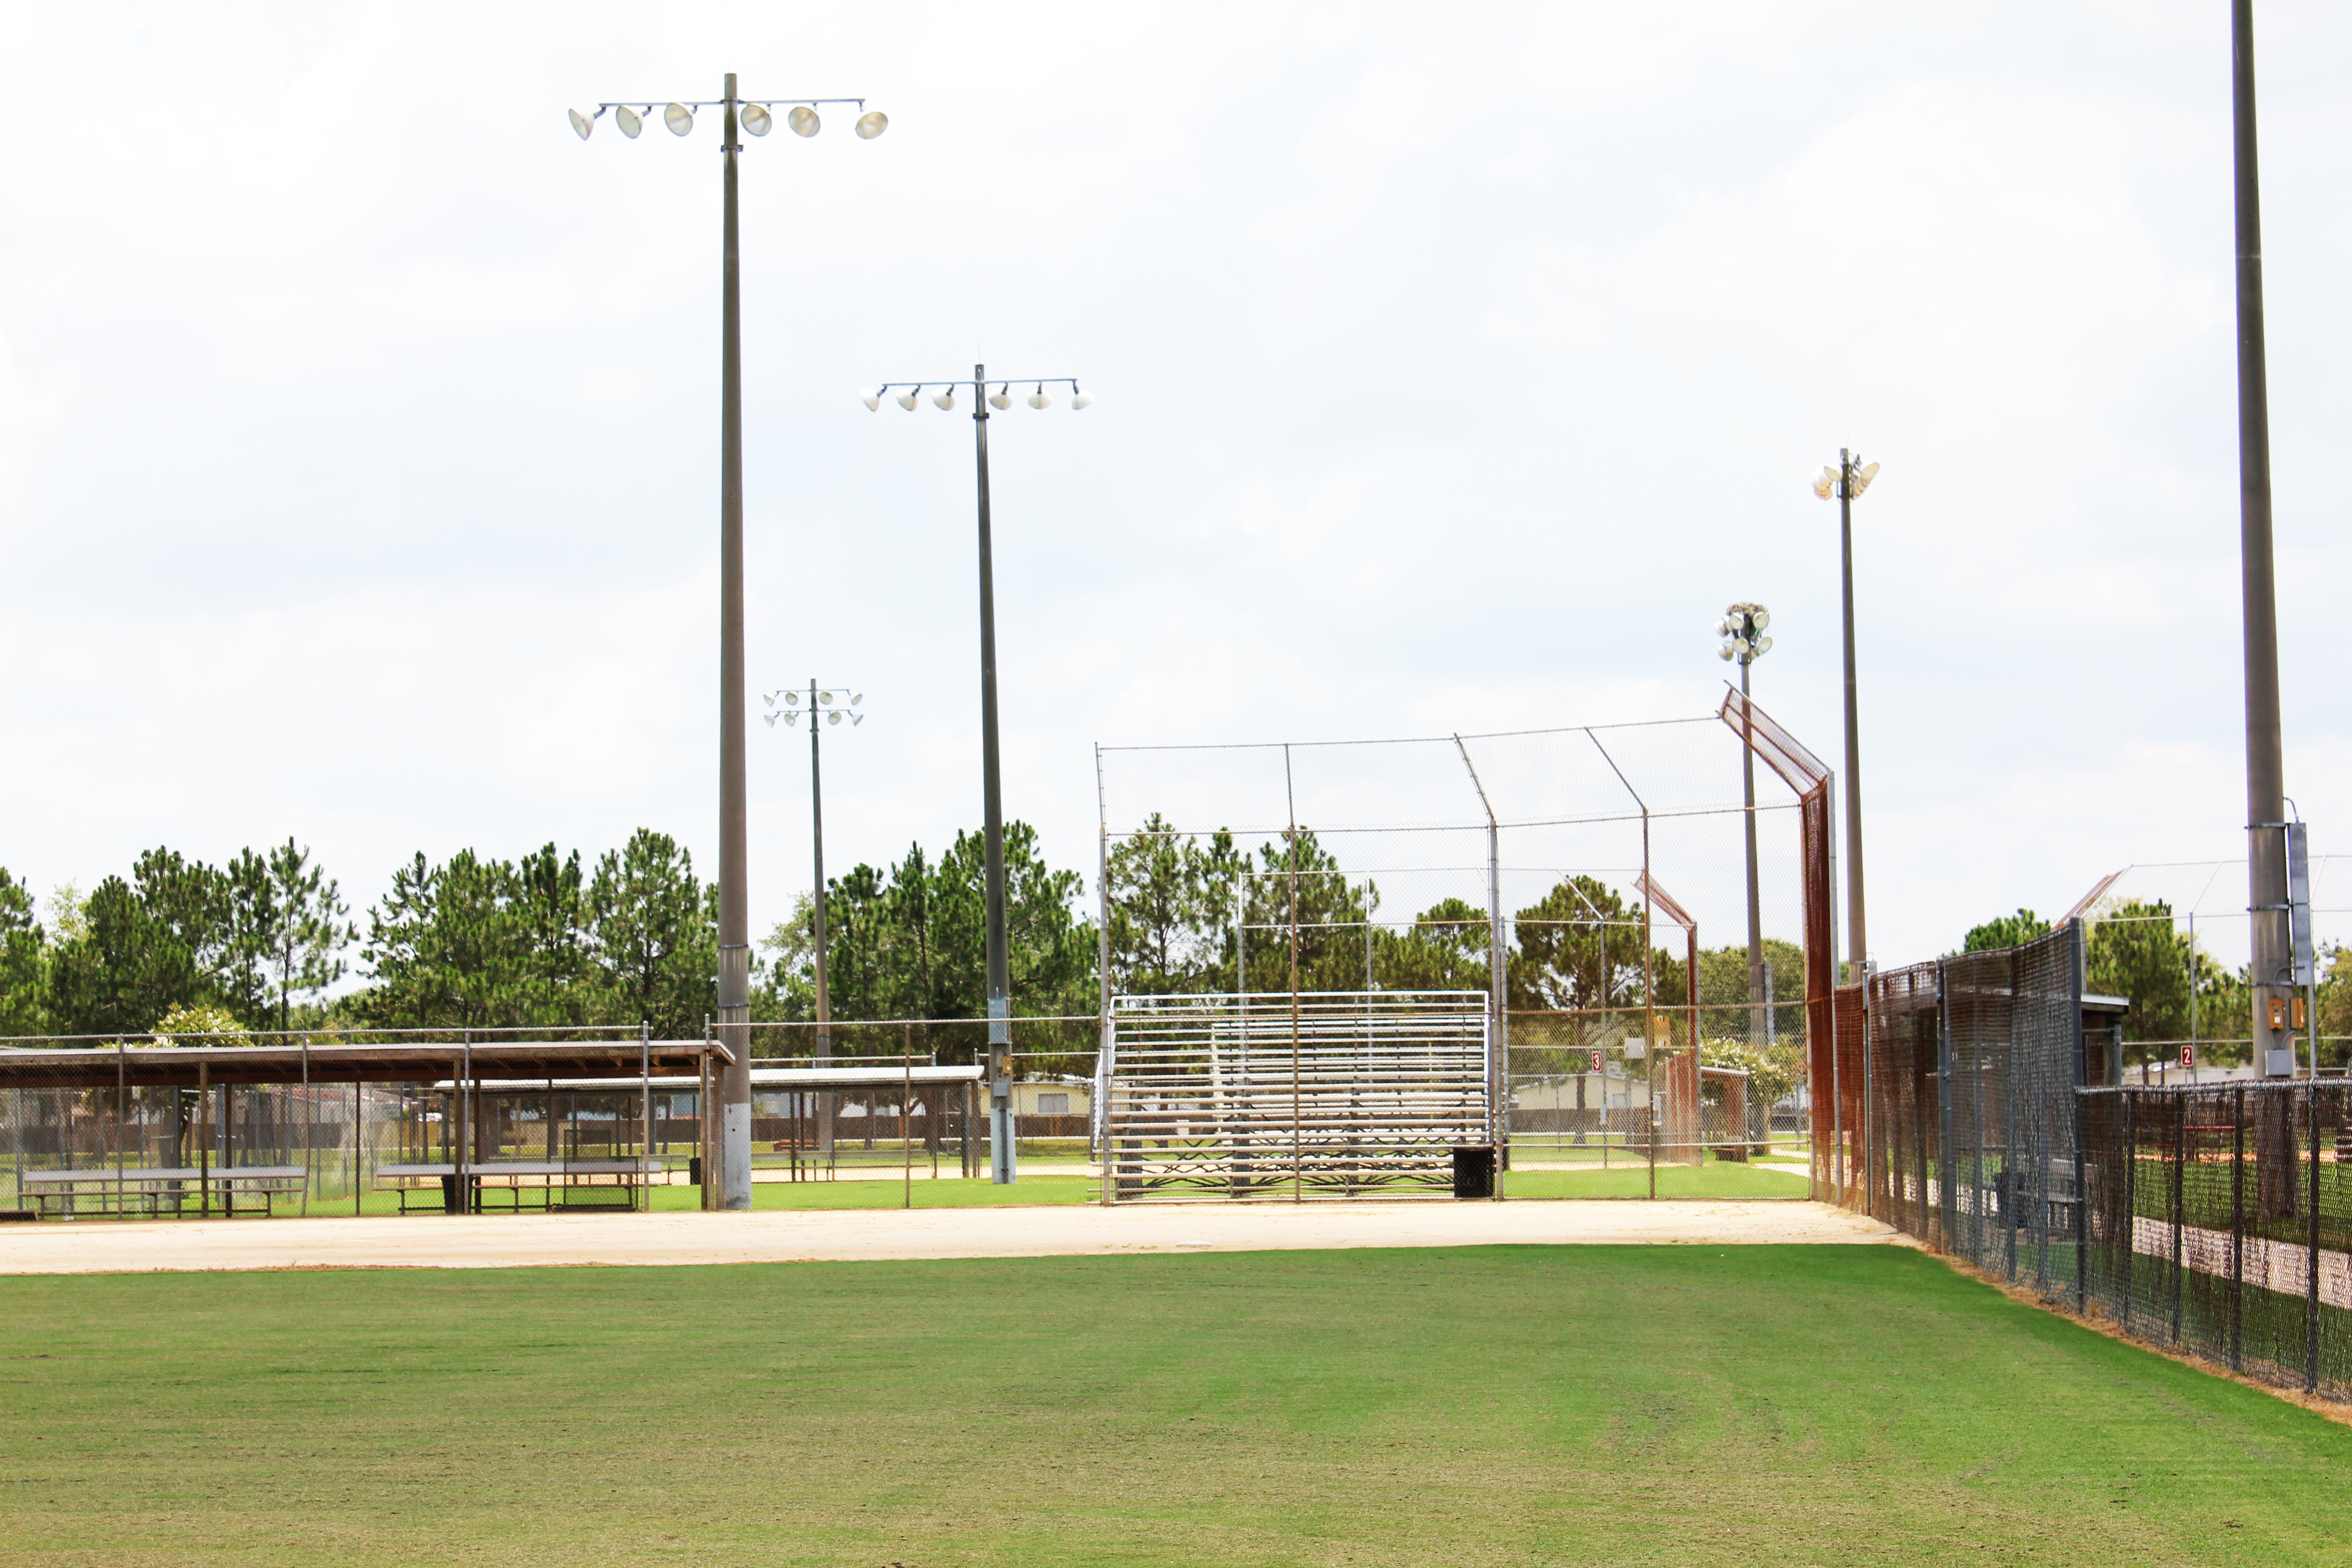 A softball field at Westside Park